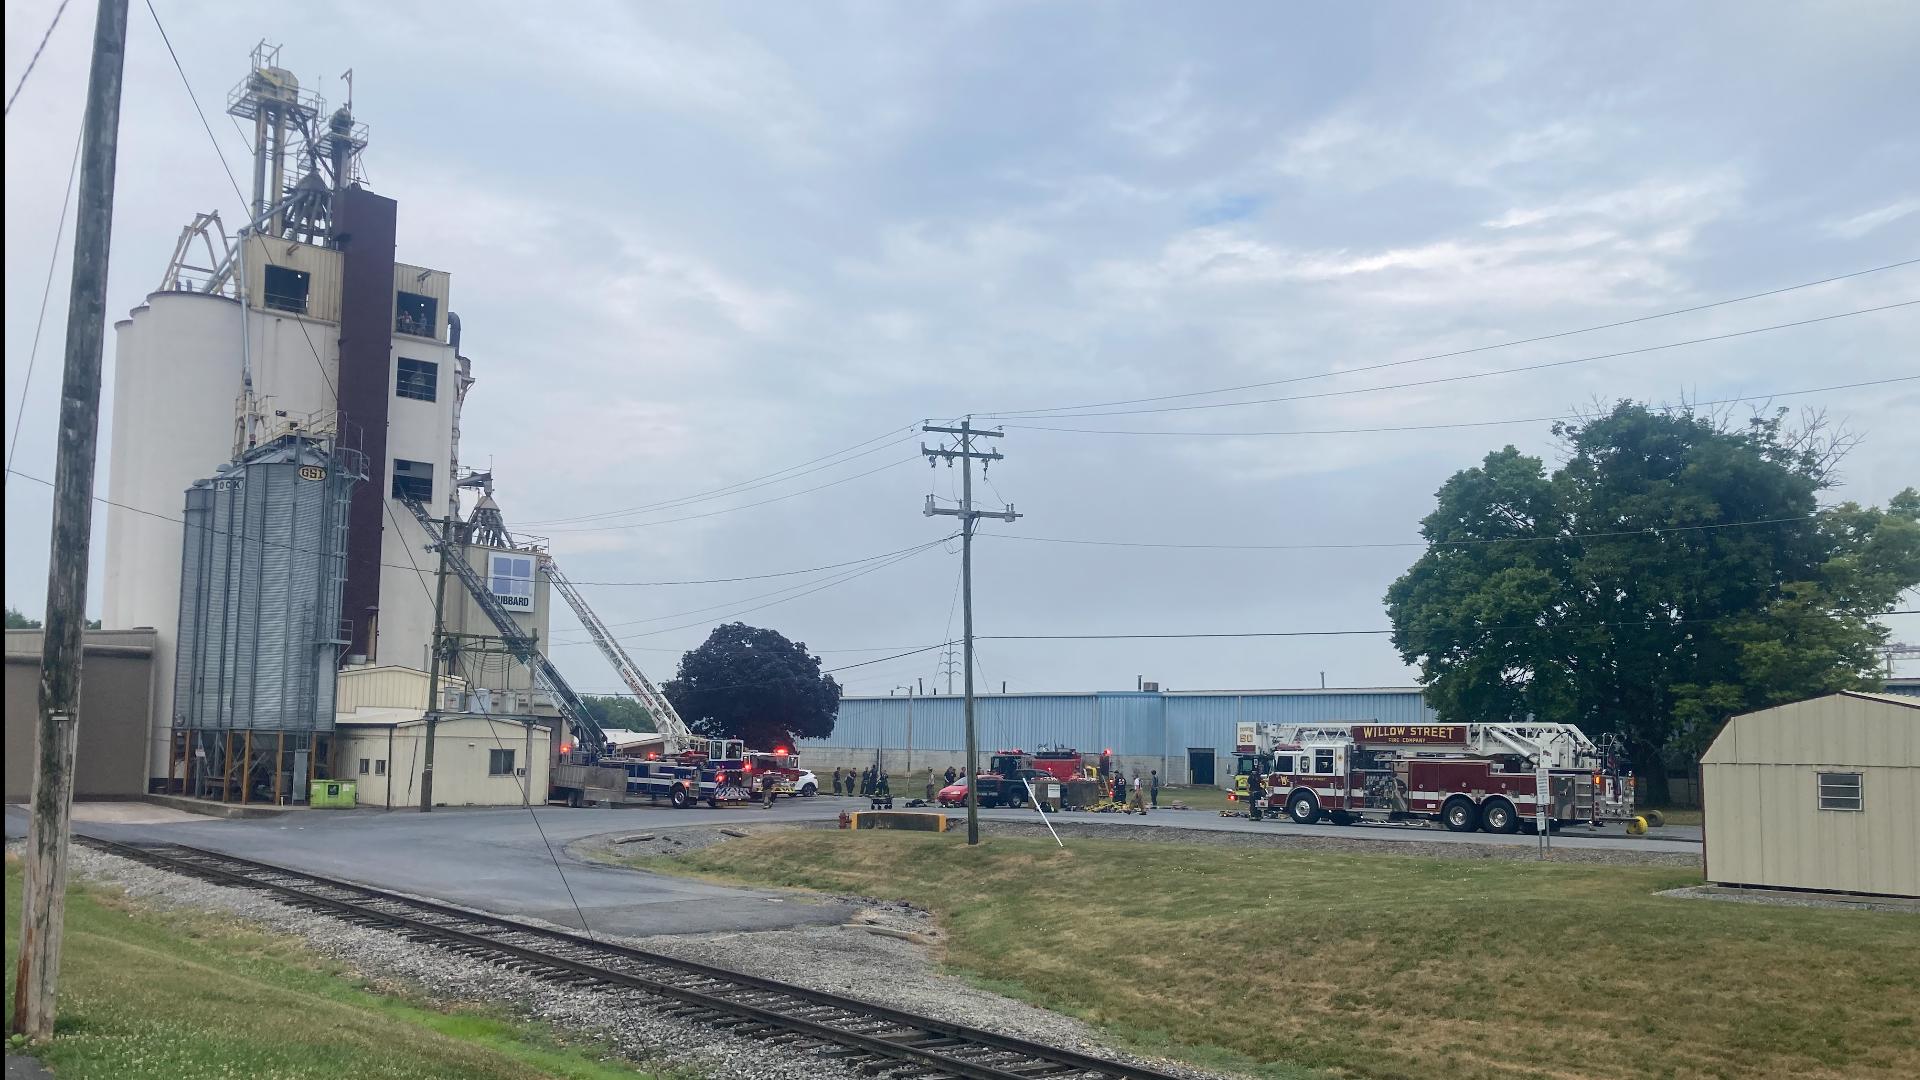 Crews responded to a 2-alarm fire at Hubbard Feed in East Hempfield Township.